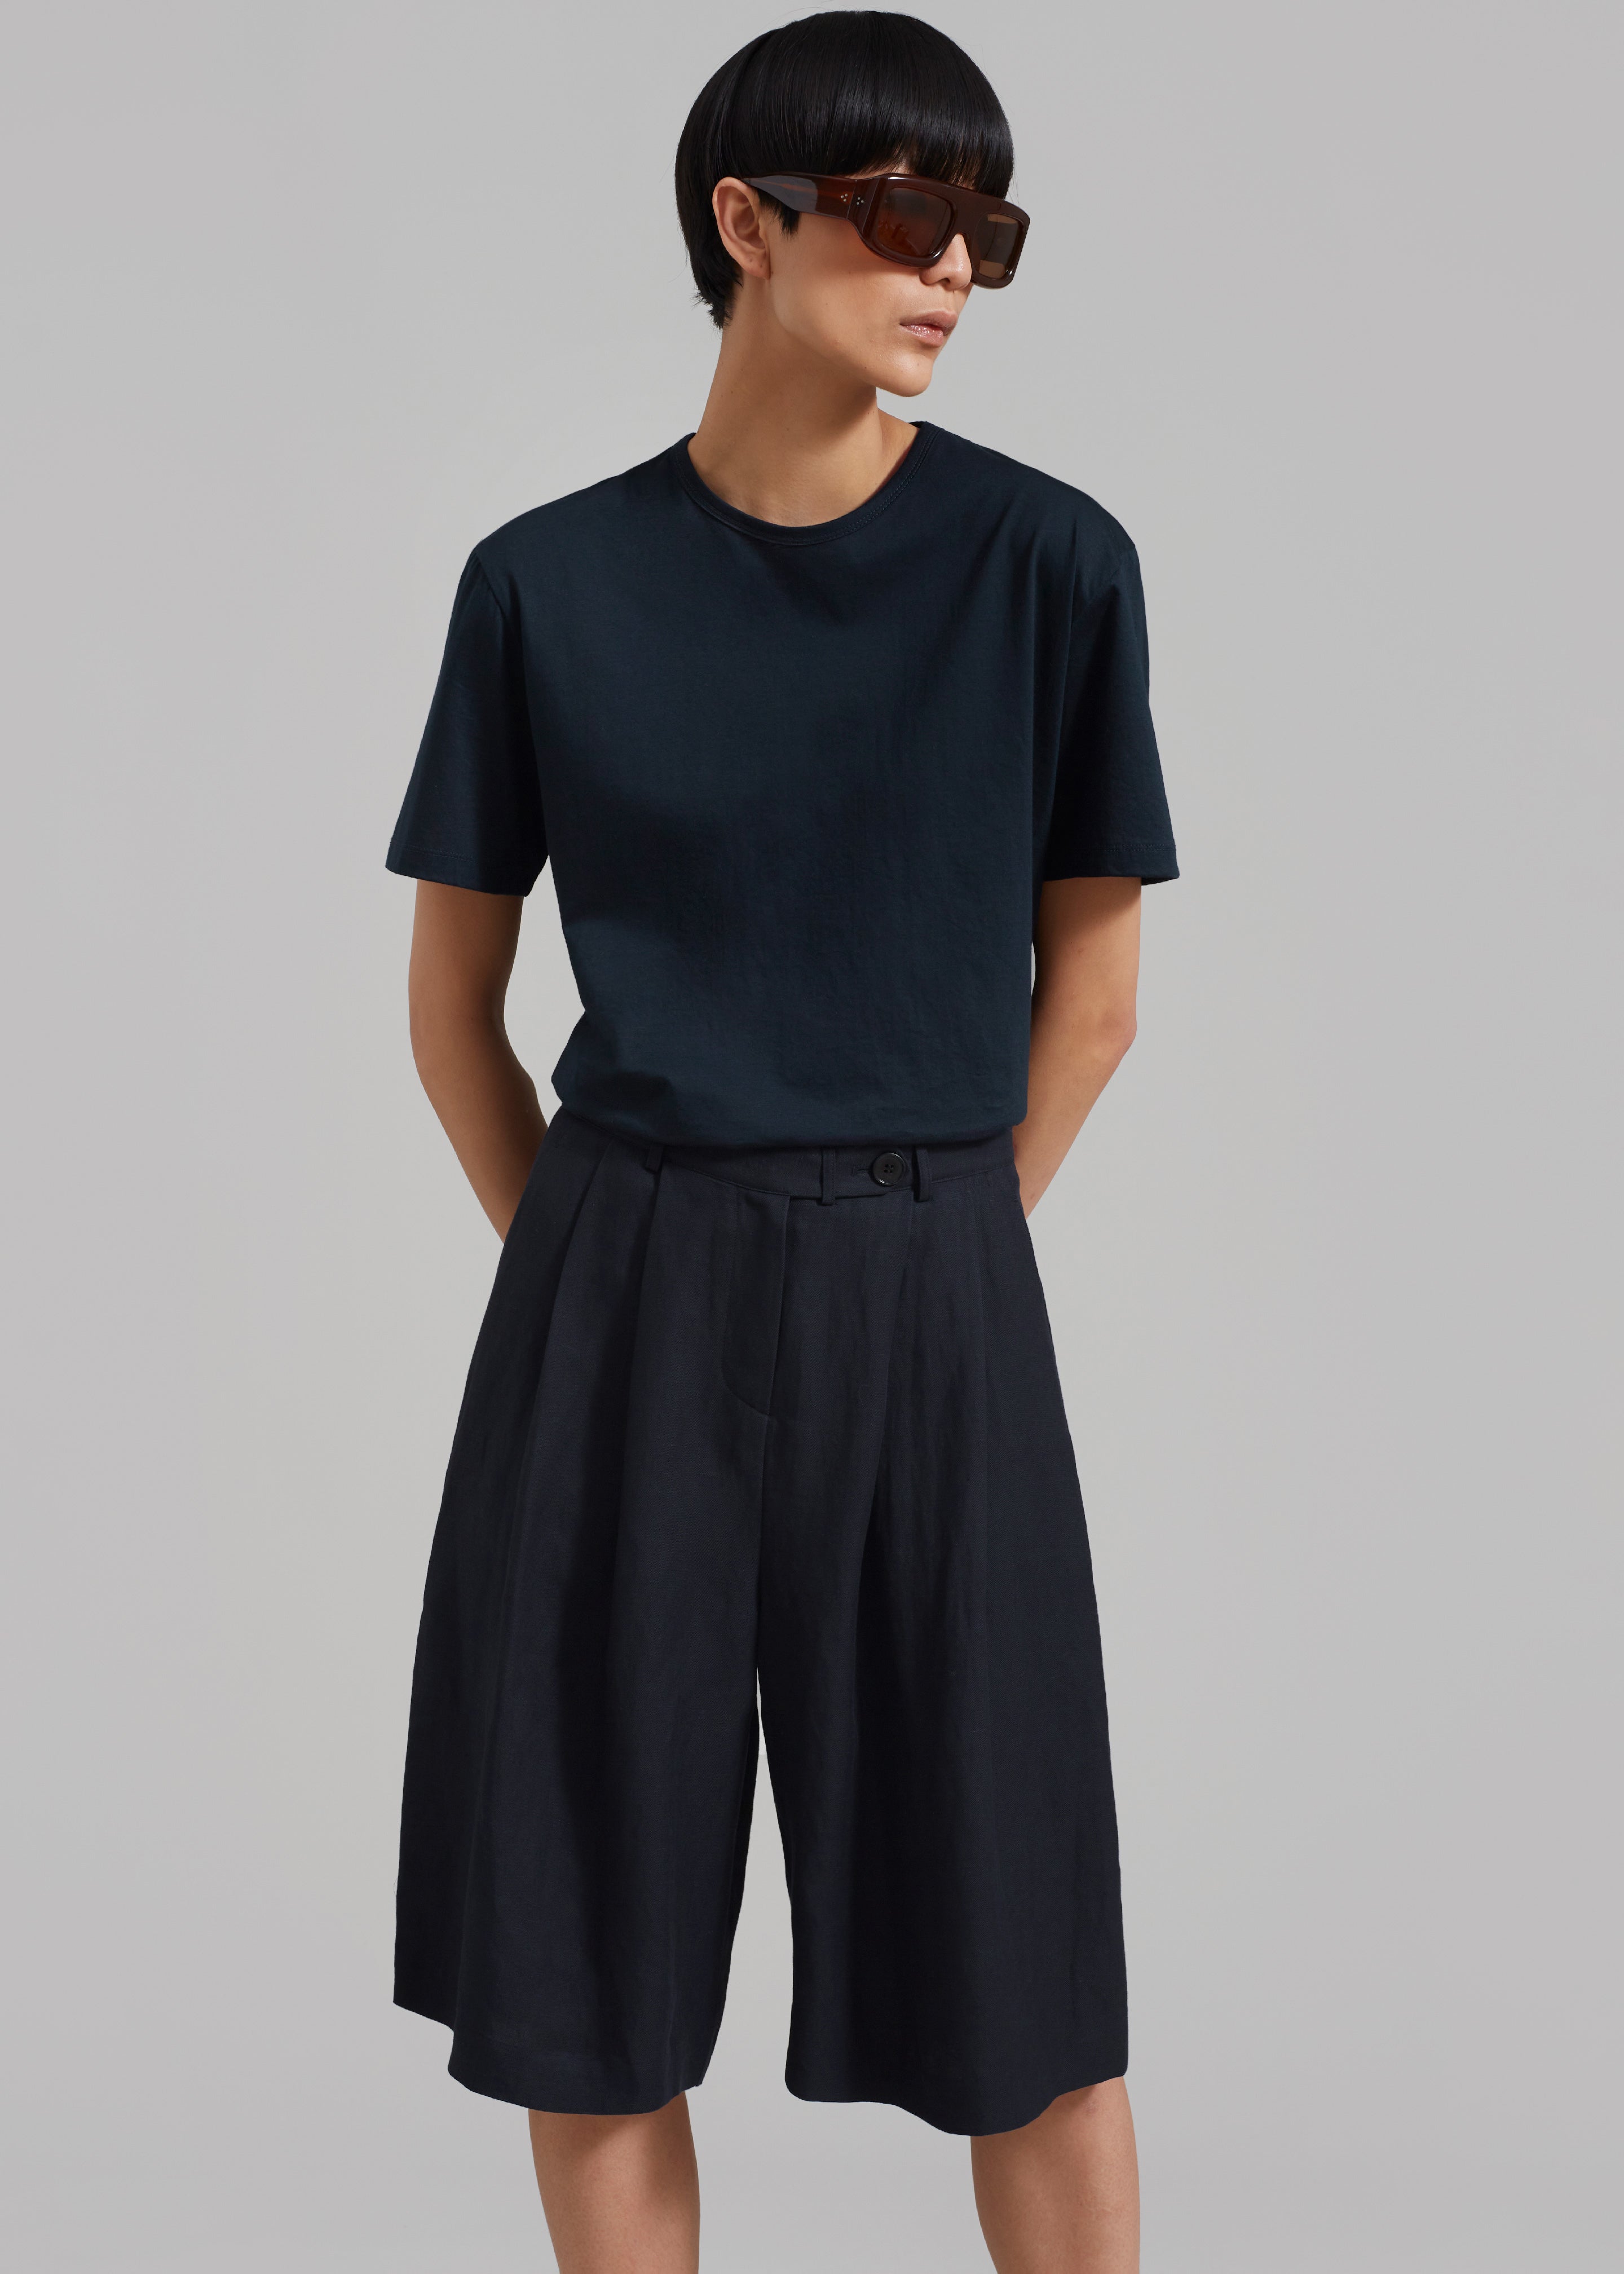 Connell Boxy Tee - Navy - 4